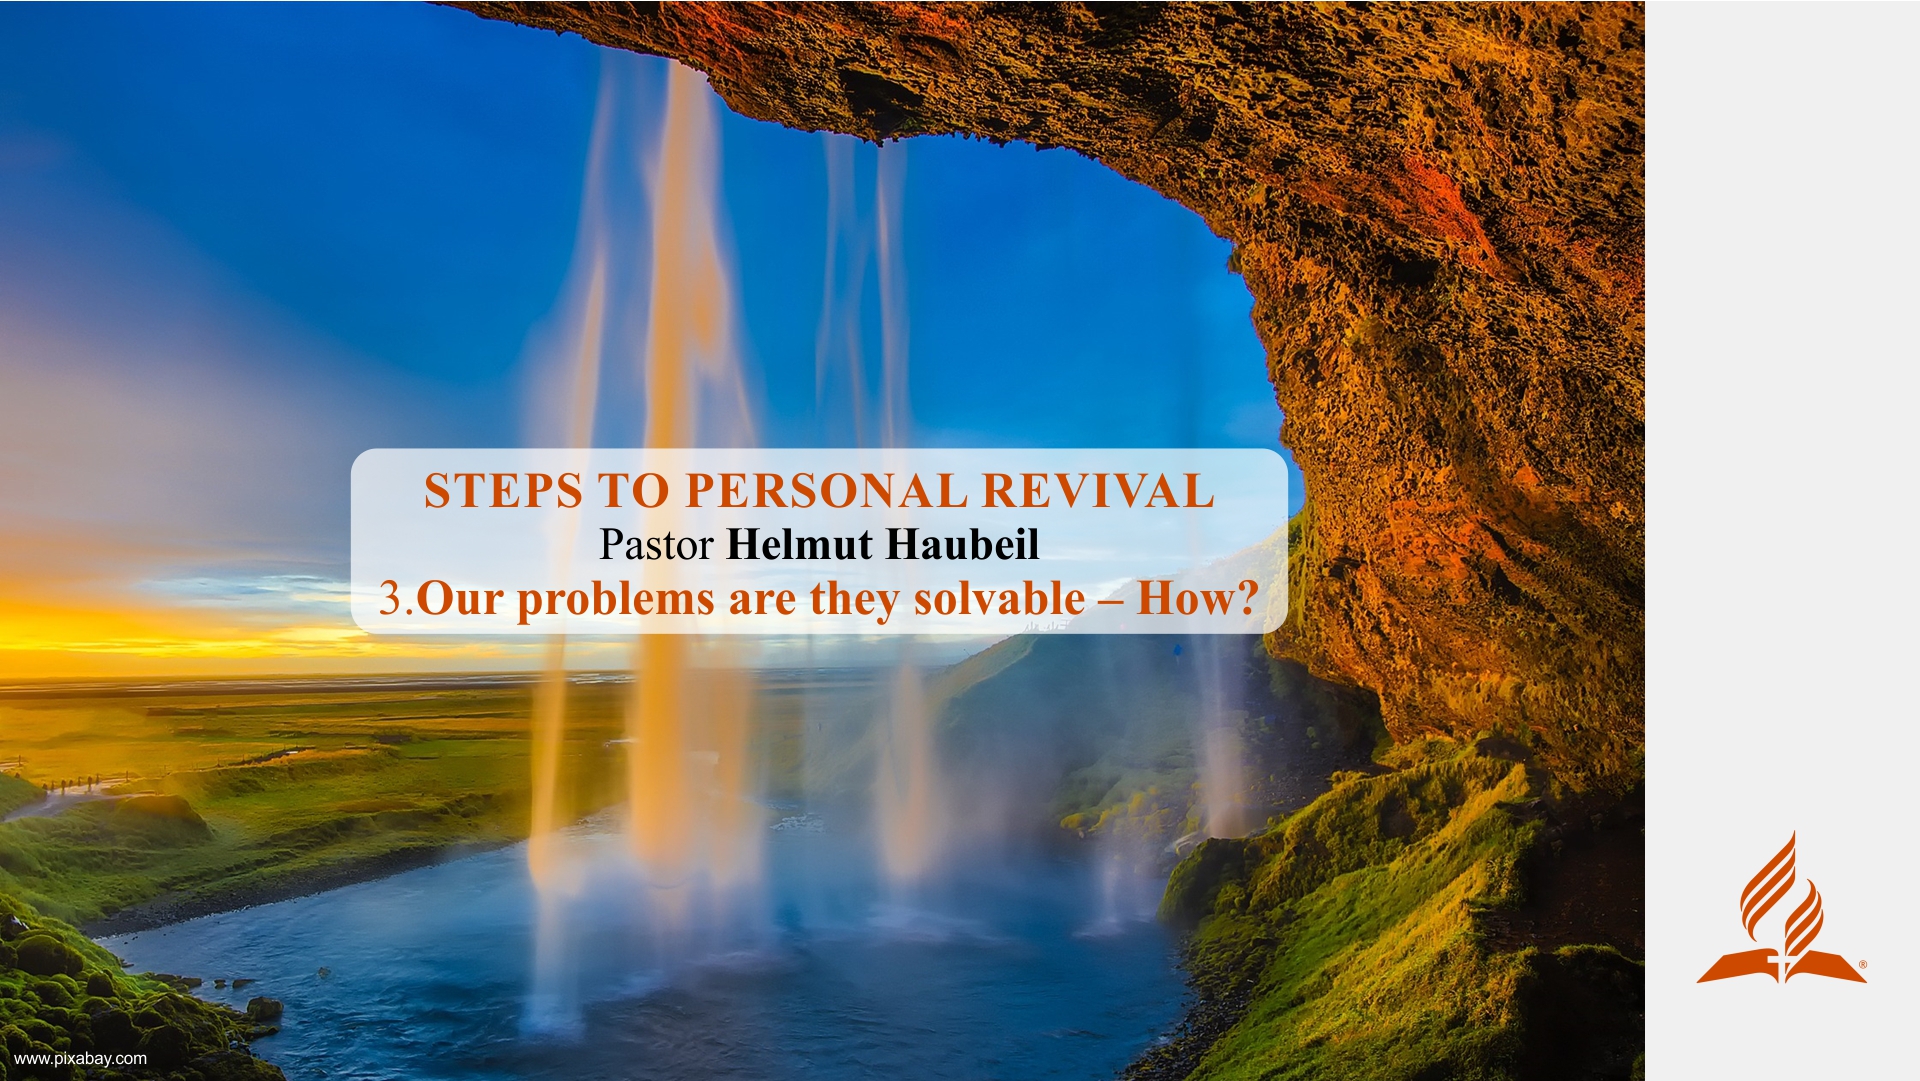 3.Our problems are they solvable – How? – STEPS TO PERSONAL REVIVAL | Pastor Helmut Haubeil